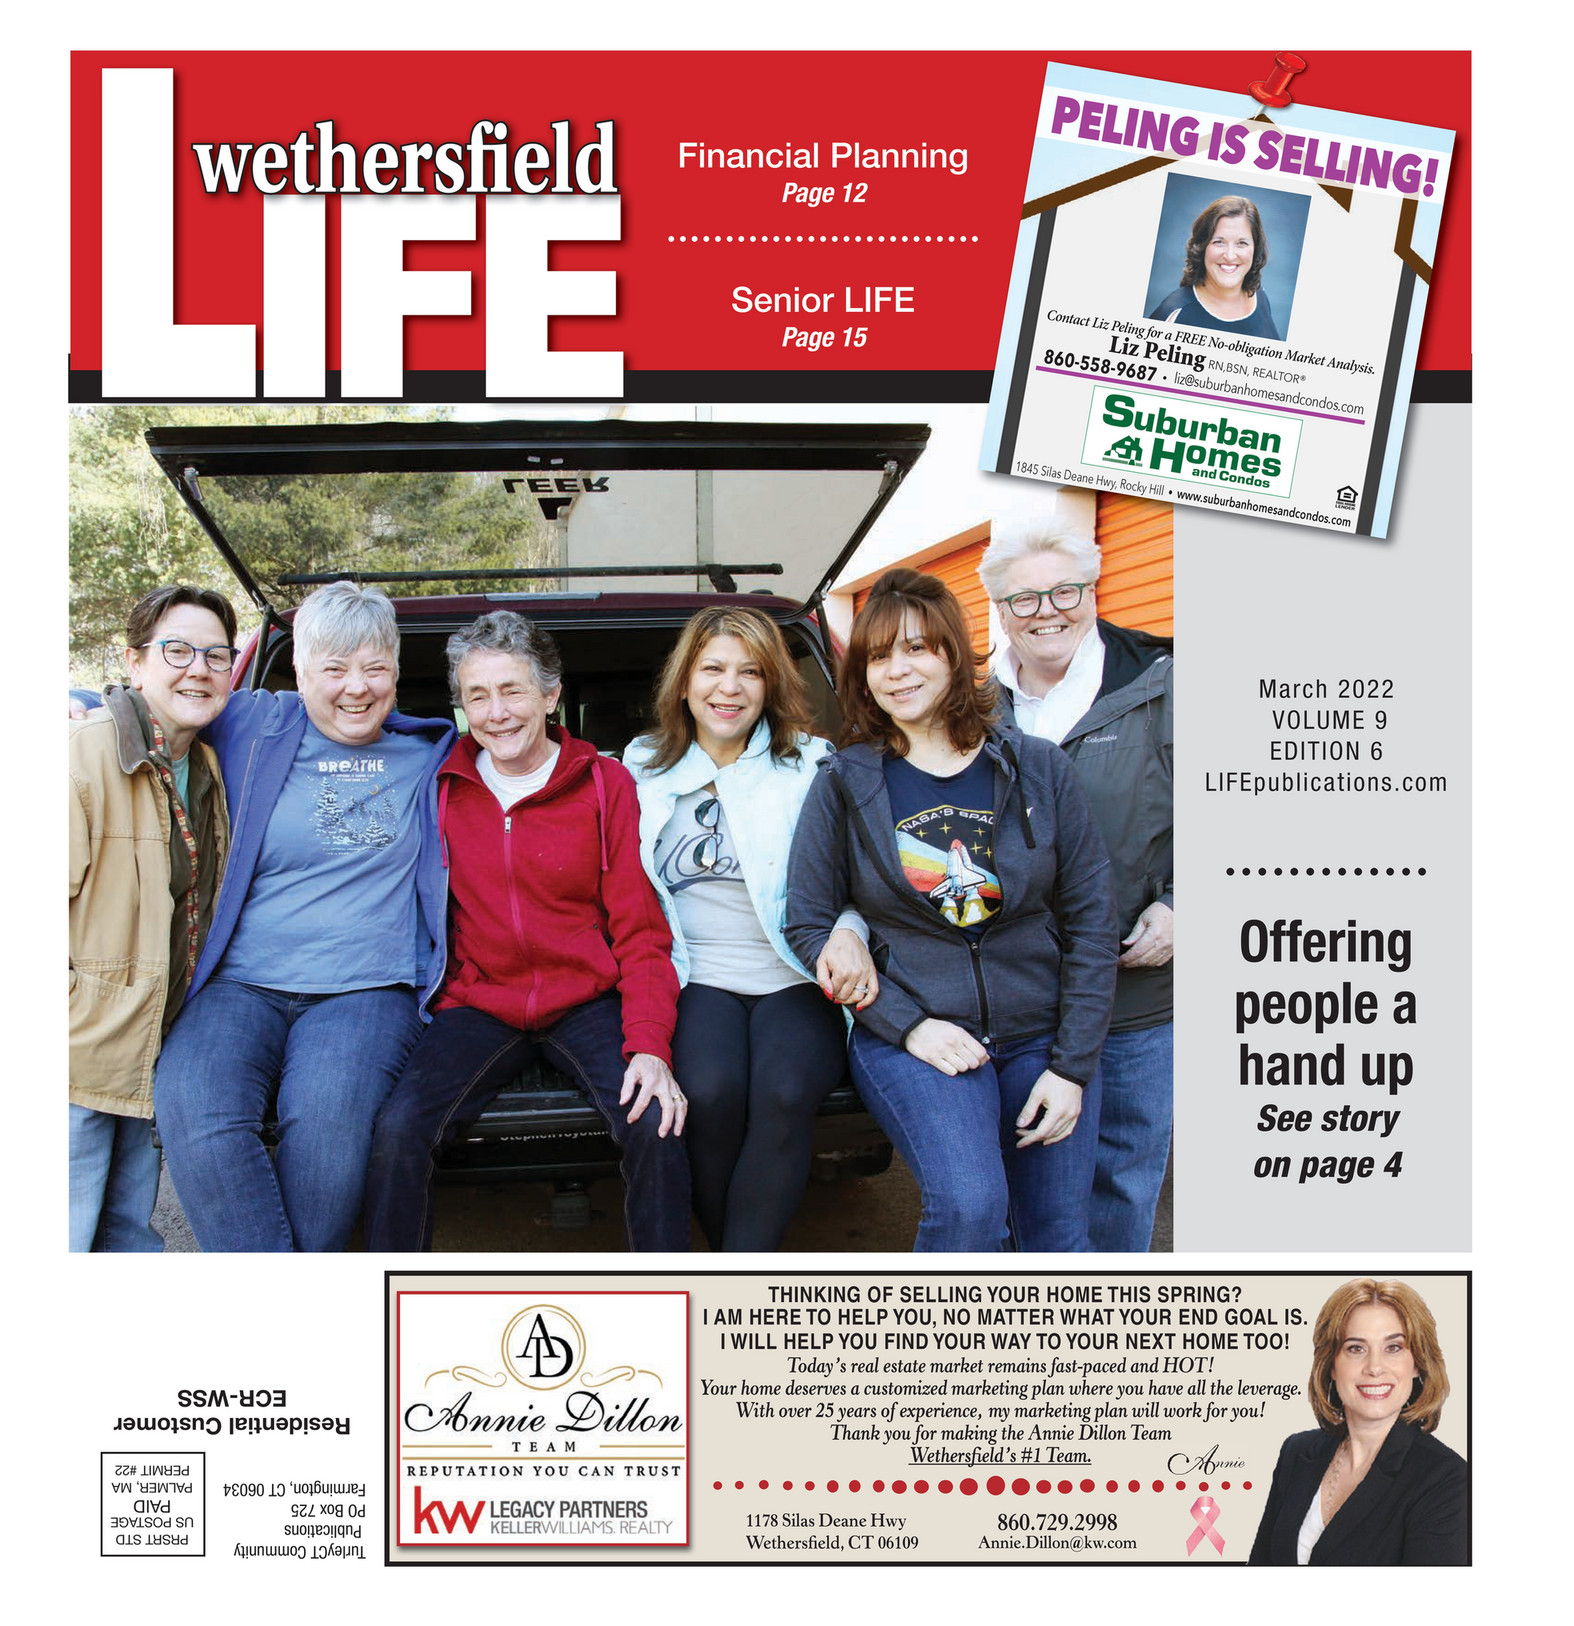 My publications WETHERSFIELD_20220301_A Page 1 Created with